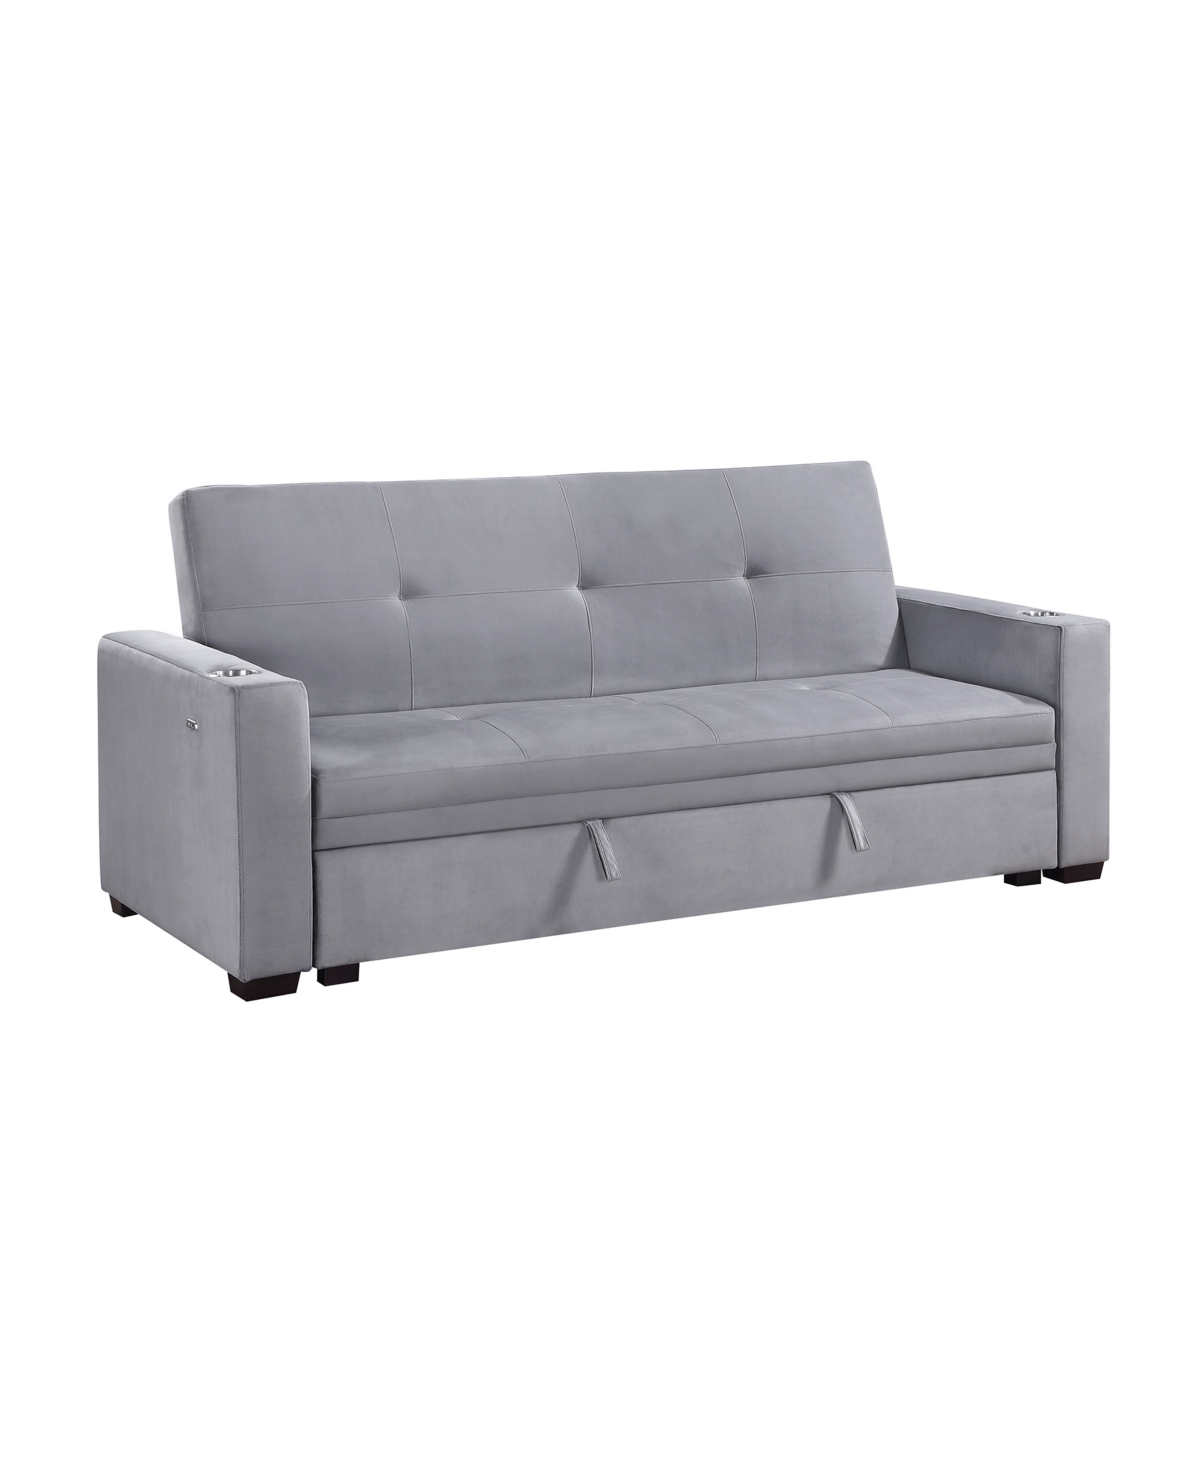 Homelegance White Label Gainesville 84" Convertible Sofa With Hidden Storage, Cup Holders And Usb Charging Ports In Gray